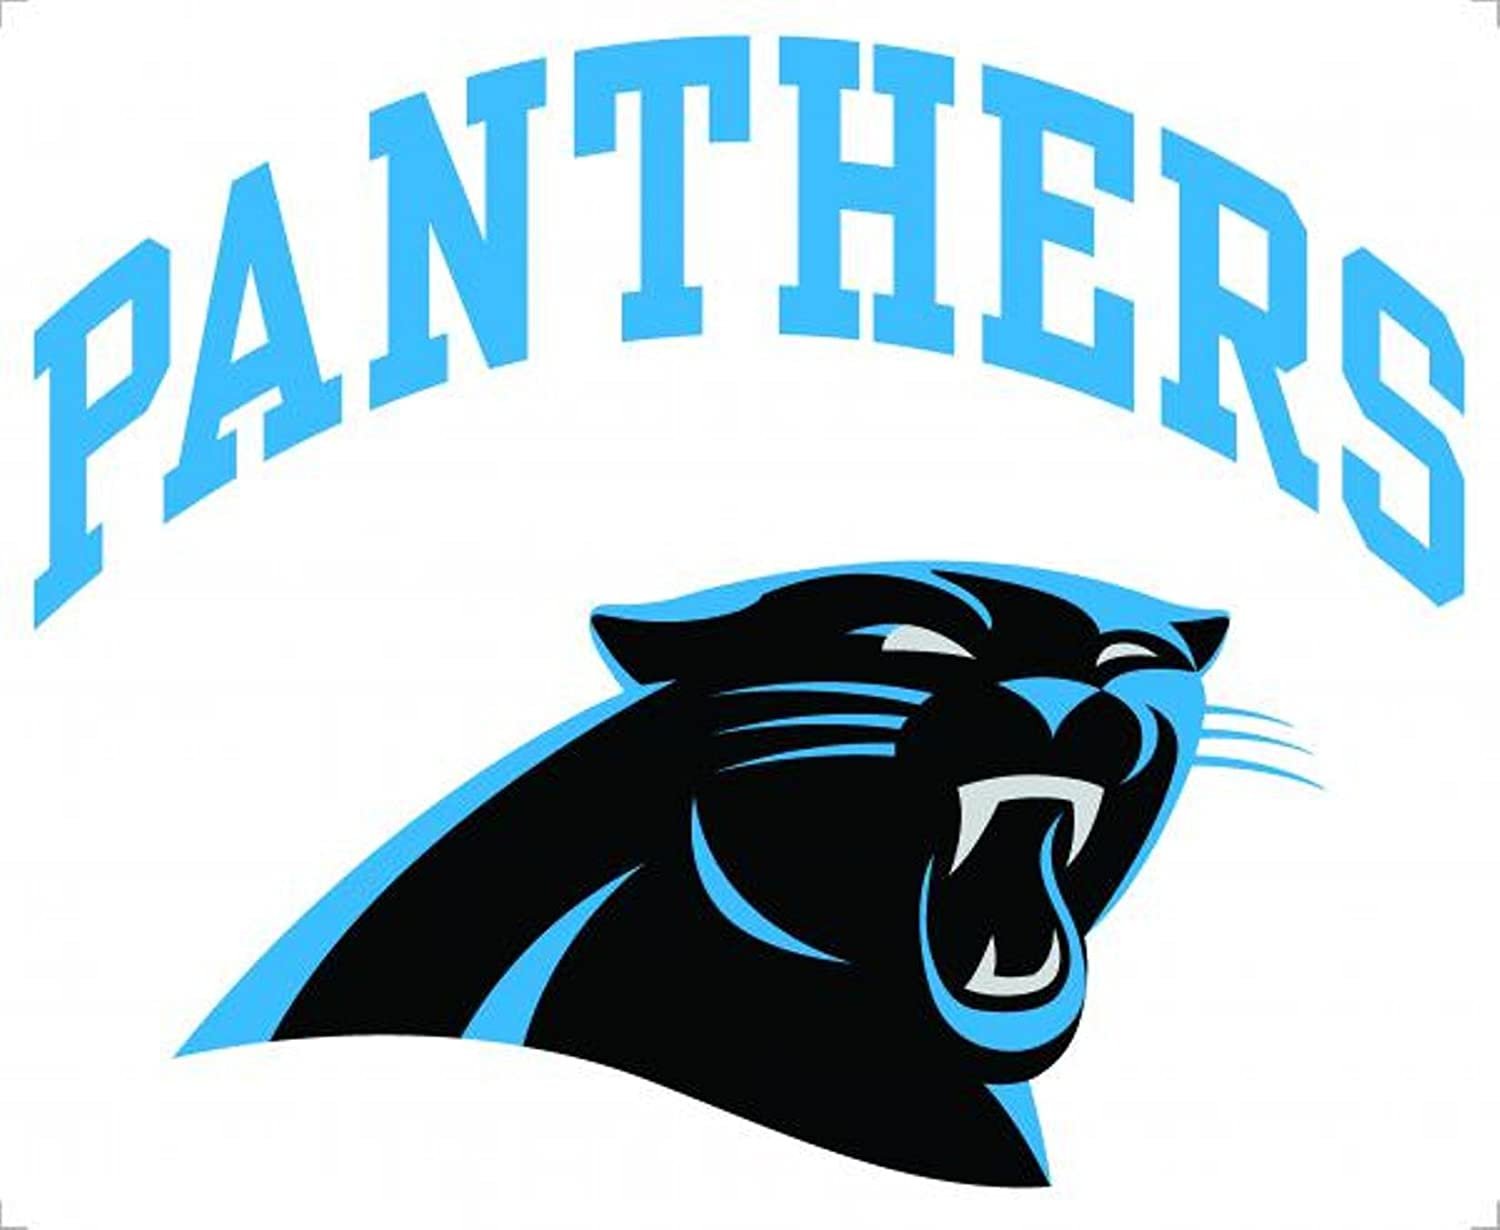 Carolina Panthers 8" ARCHED Decal Flat Vinyl Reusable Repositionable Auto Home Football